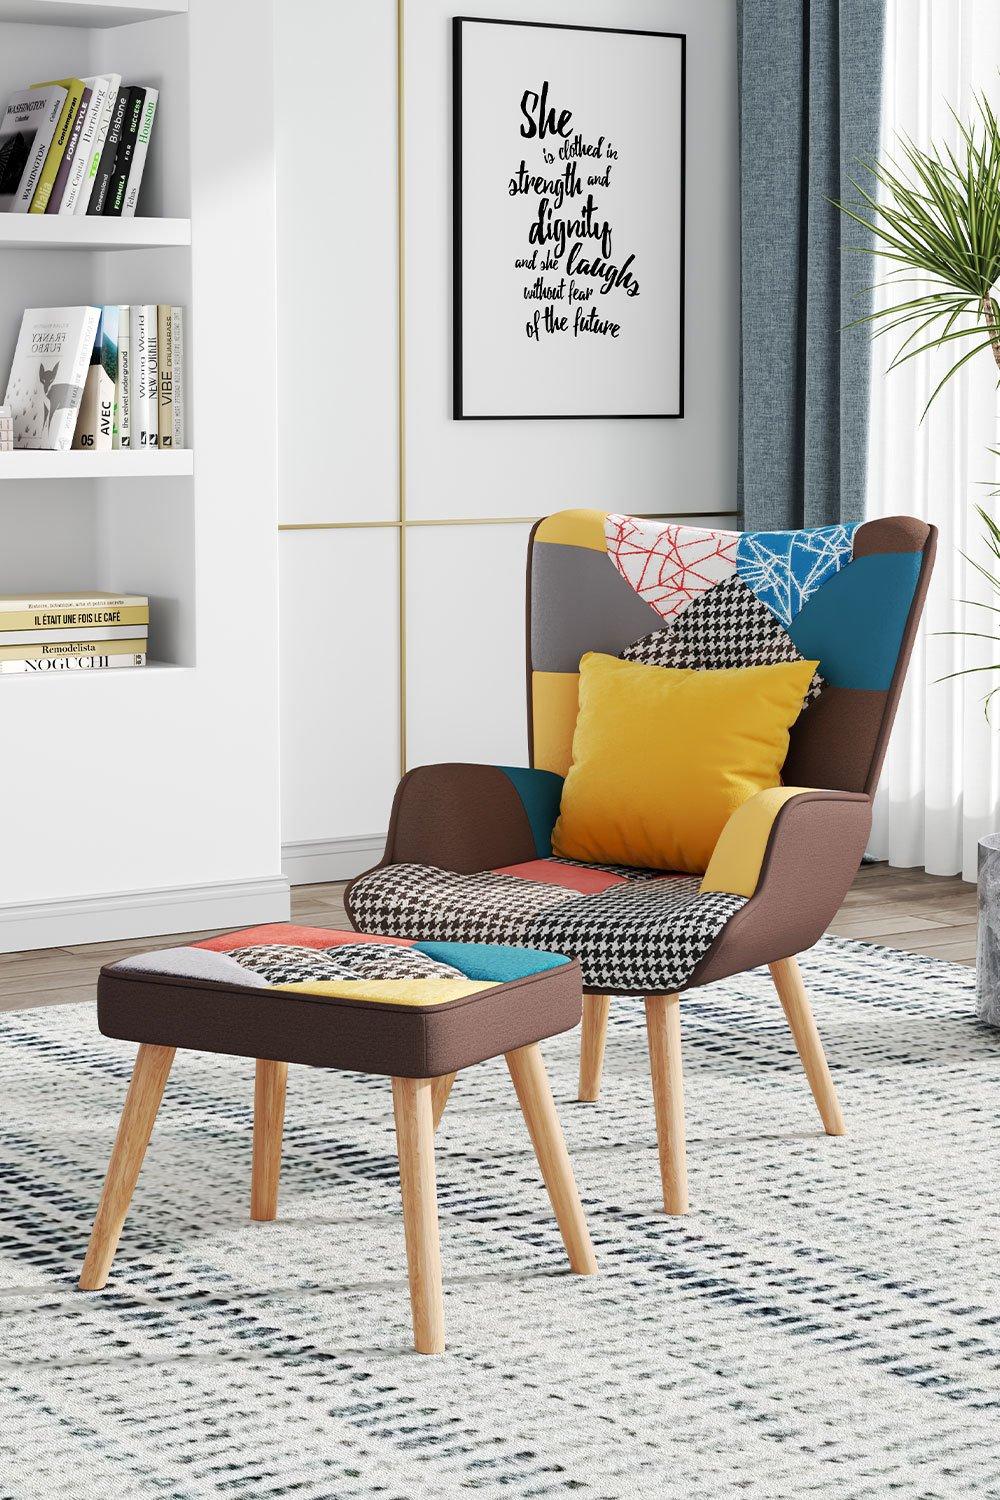 Patchwork Tufted Armchair with Cushion and Footstool